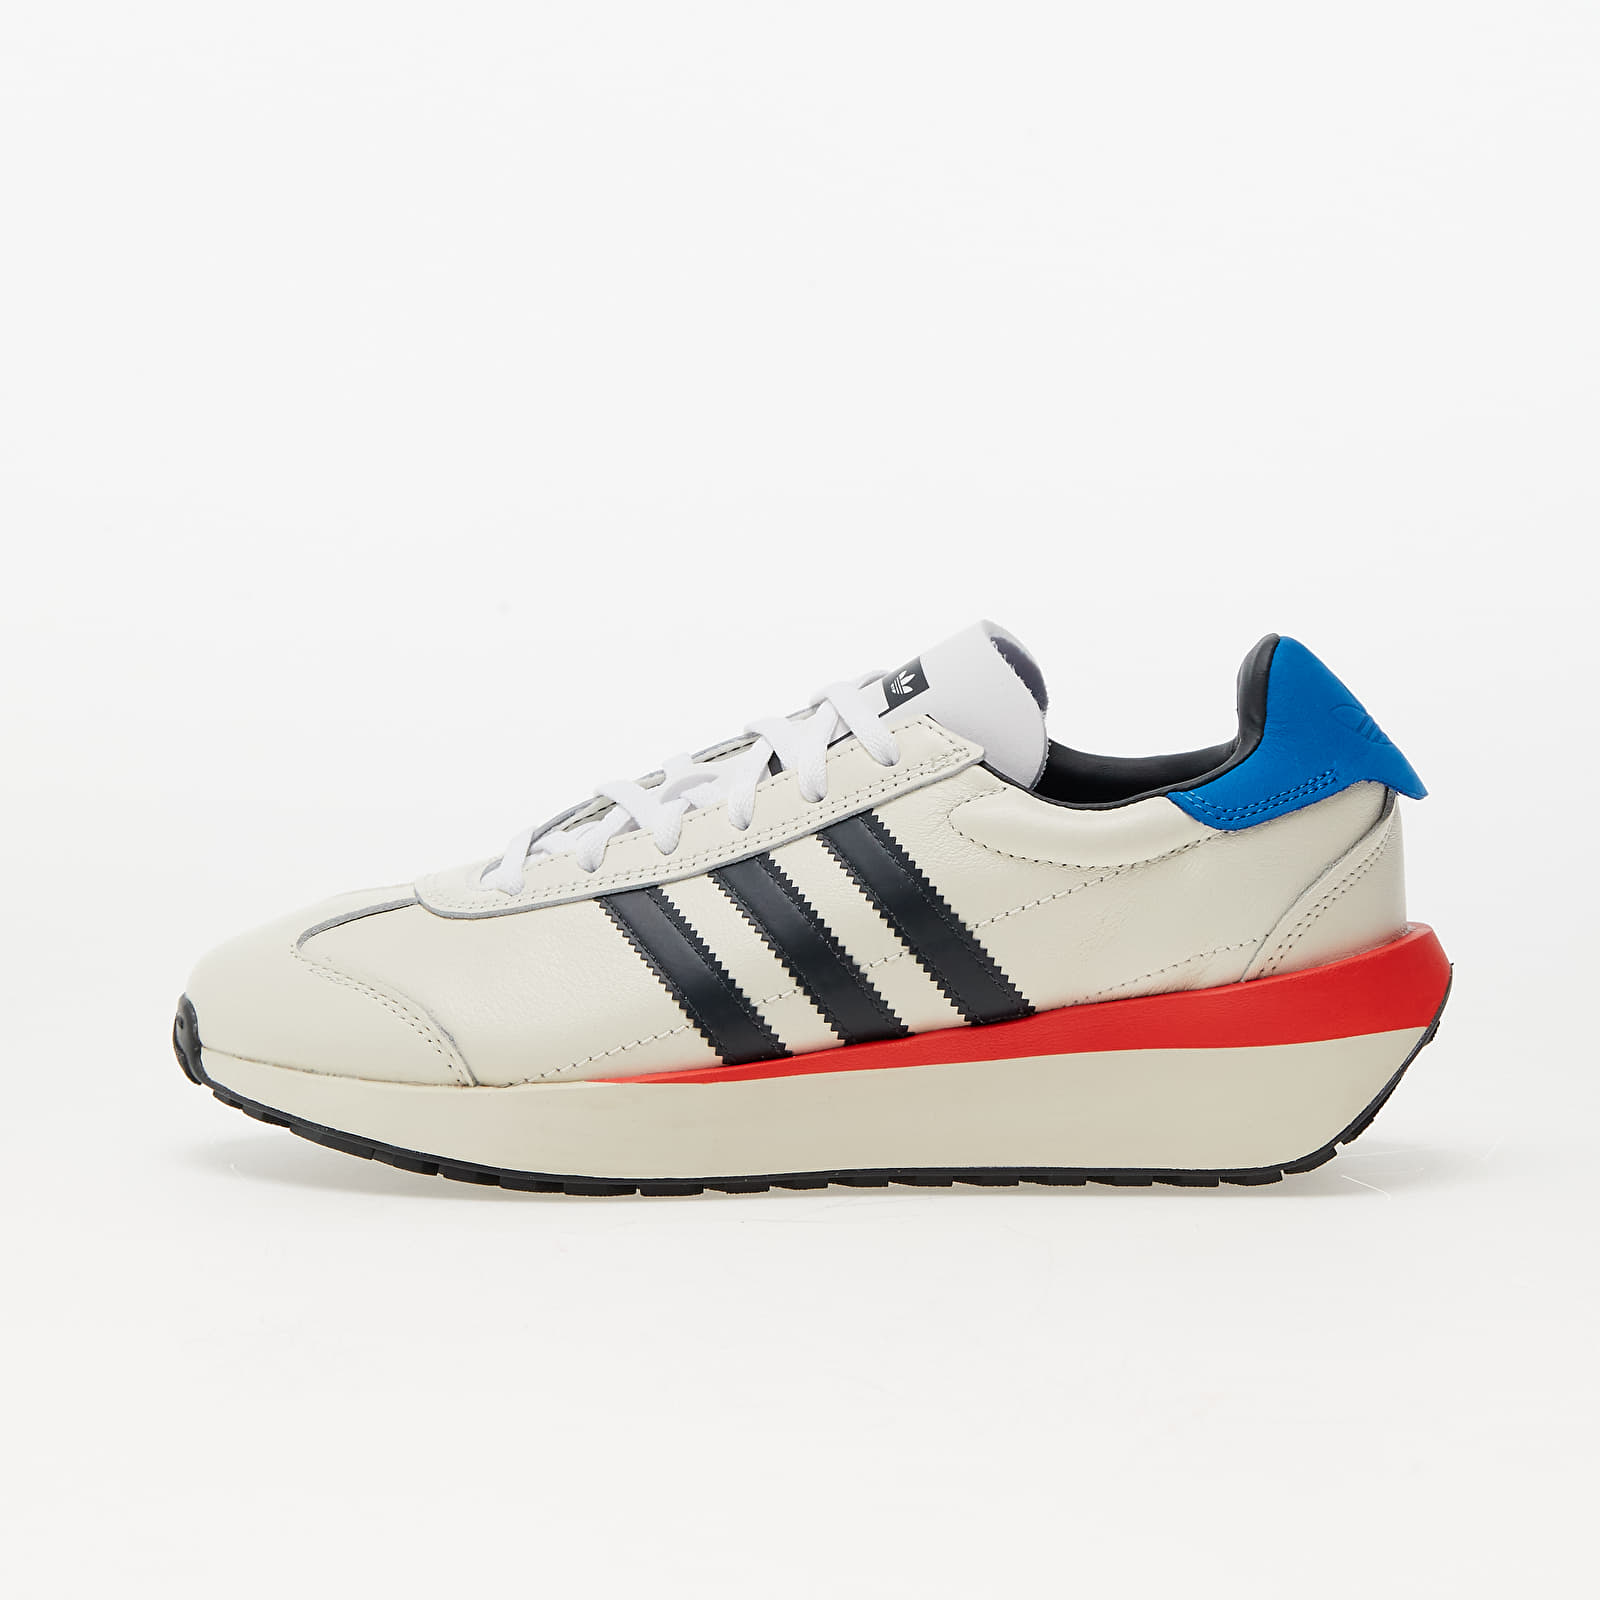 Männer adidas Country Xlg Off White/ Carbon/ Blue Bird